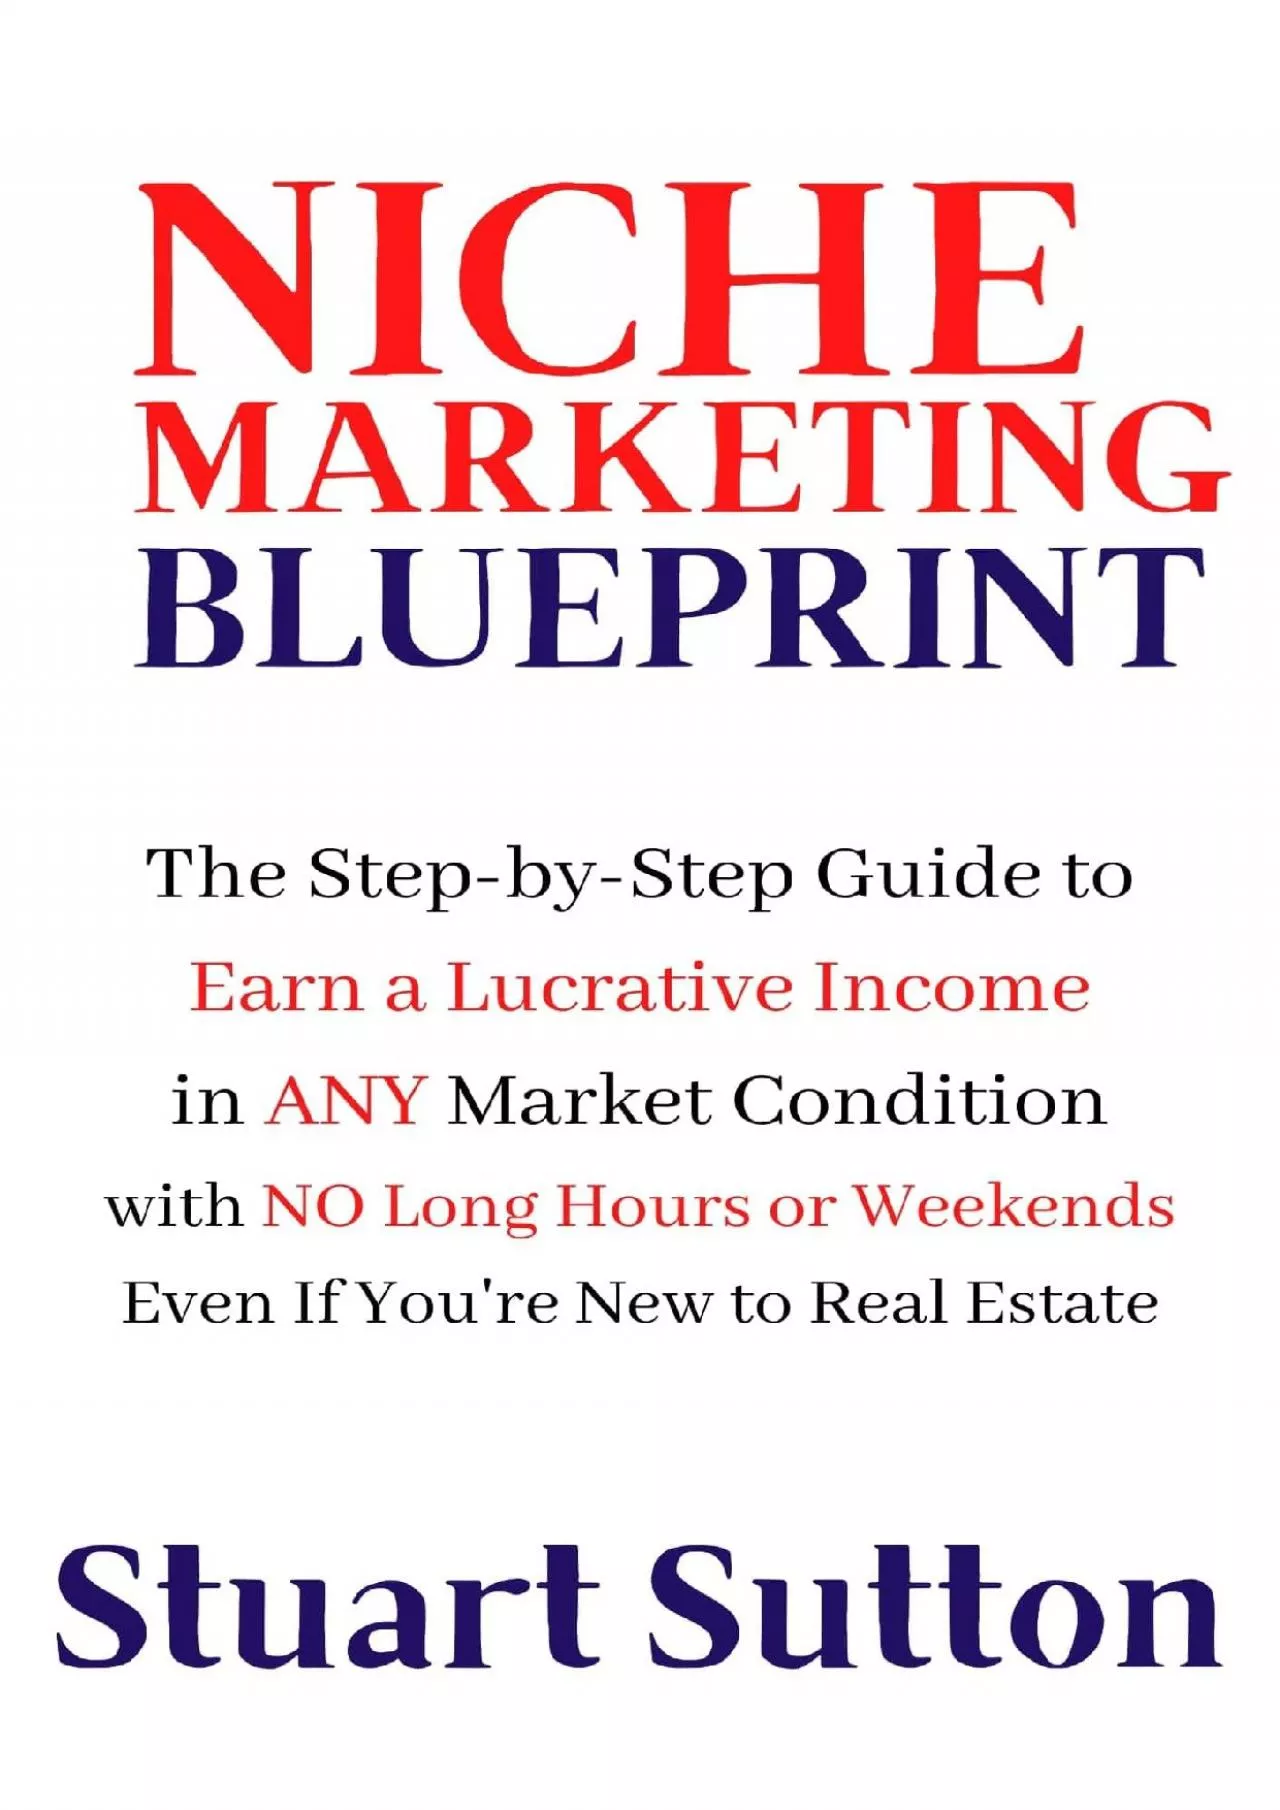 Niche Marketing Blueprint: The Step-by-Step Guide to Earn a Lucrative Income in Any Market